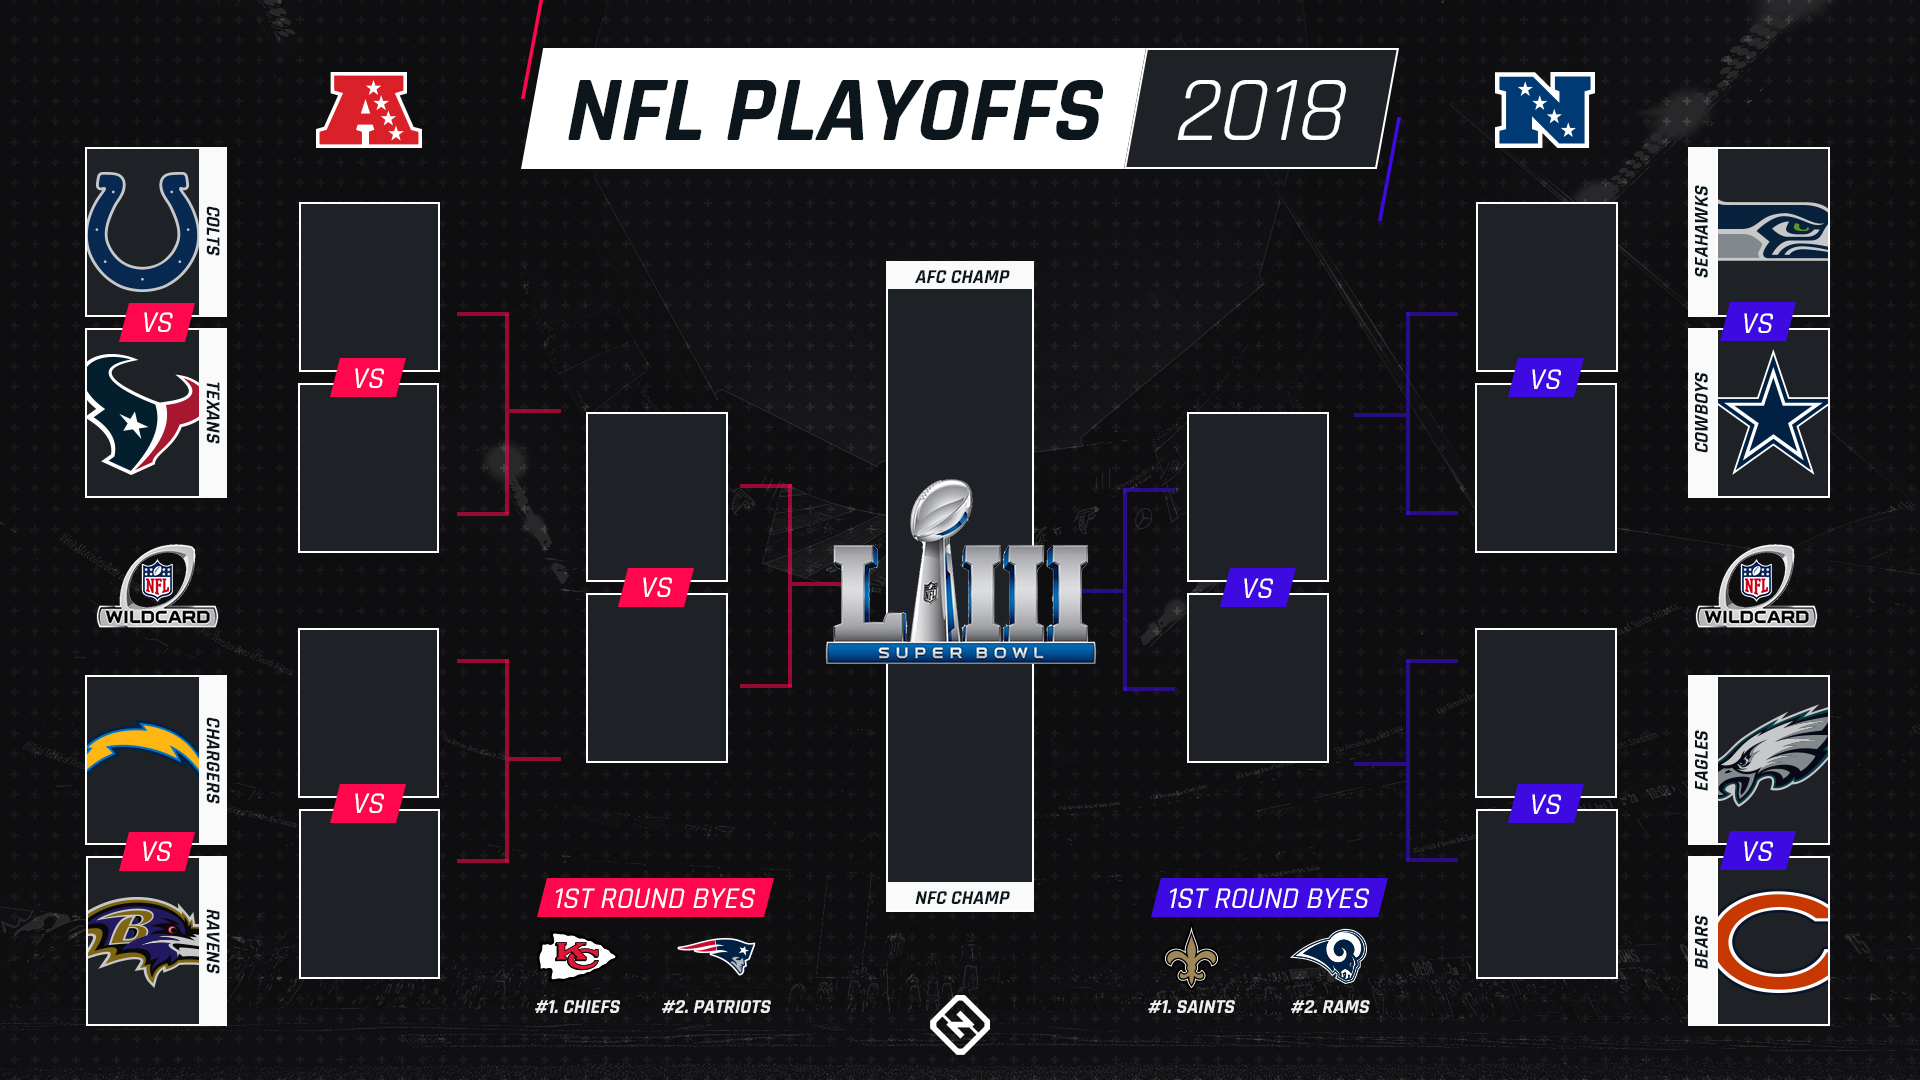 NFL playoff schedule: Dates, times, TV channels for every 2019 postseason game | NFL ...1920 x 1080